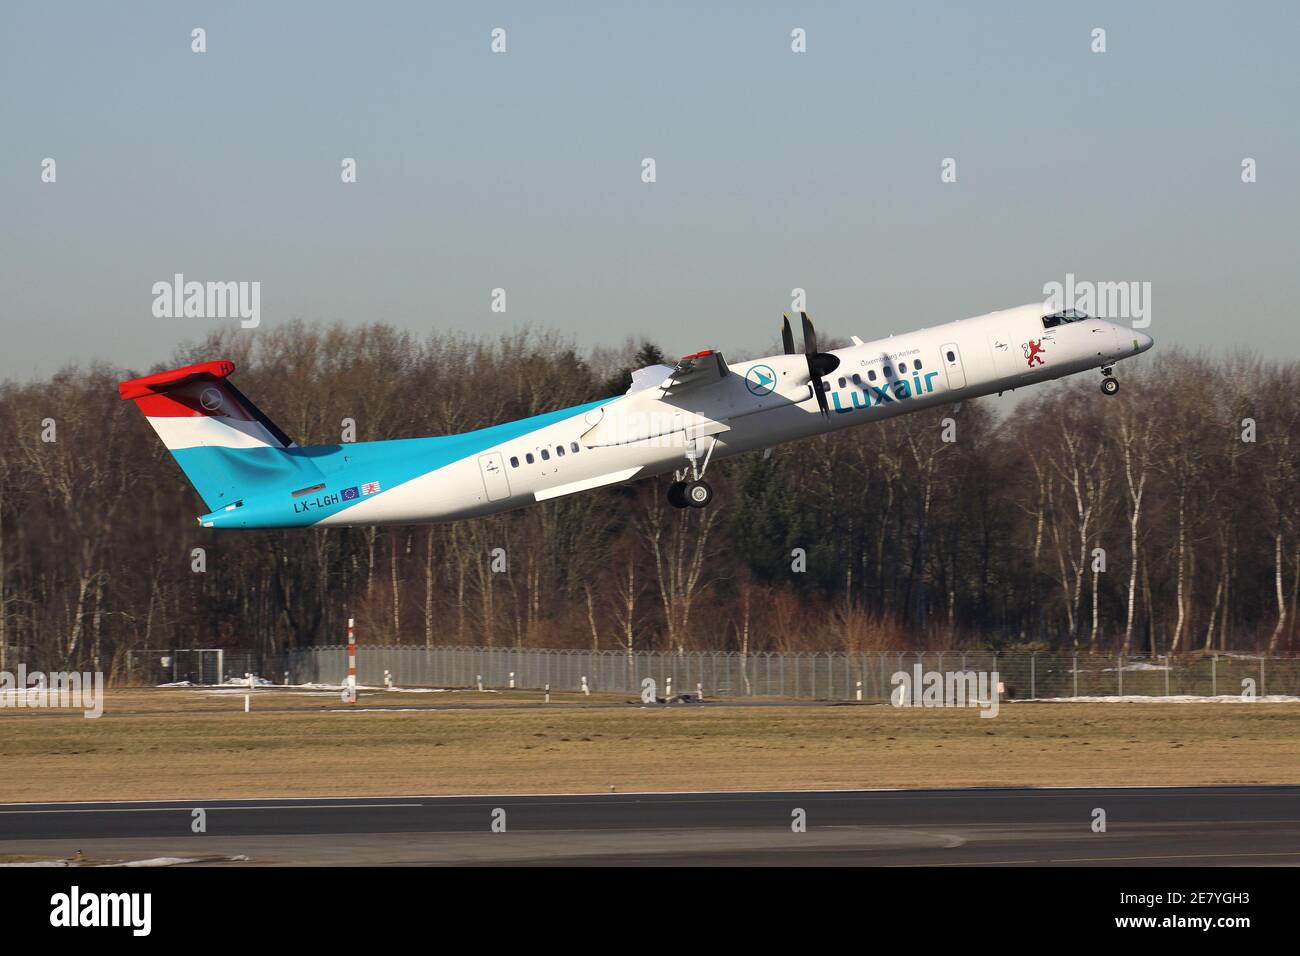 Luxair Bombardier Dash 8 Q400 with registration LX-LGH just airborne at Hamburg Airport. Stock Photo